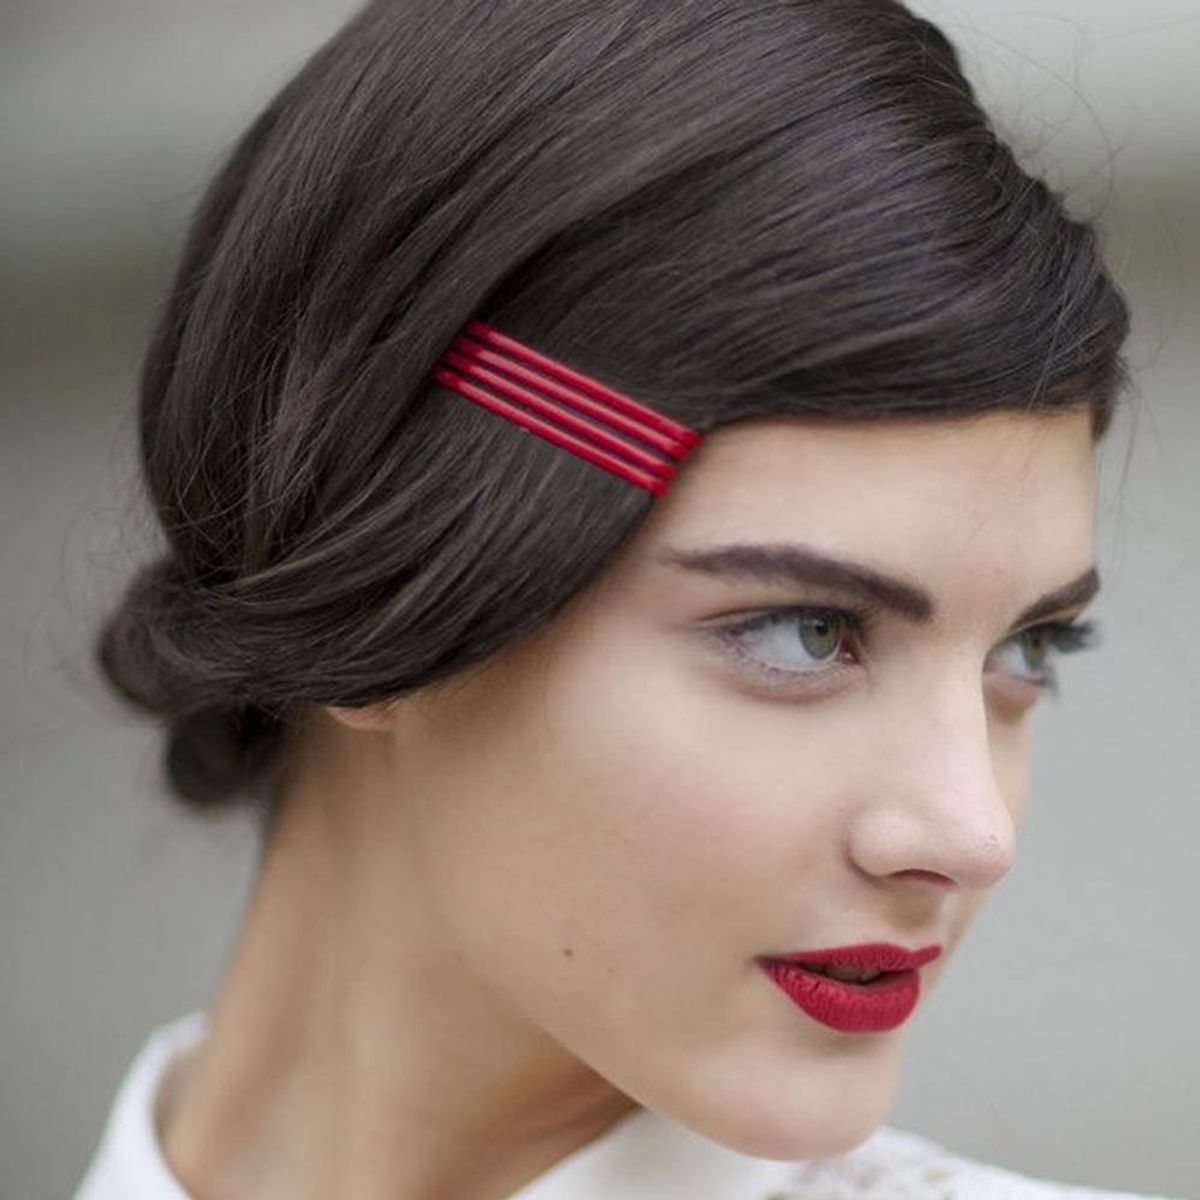 14 Hairstyles That Prove Bobby Pins Are the Only Hair Accessory You Need